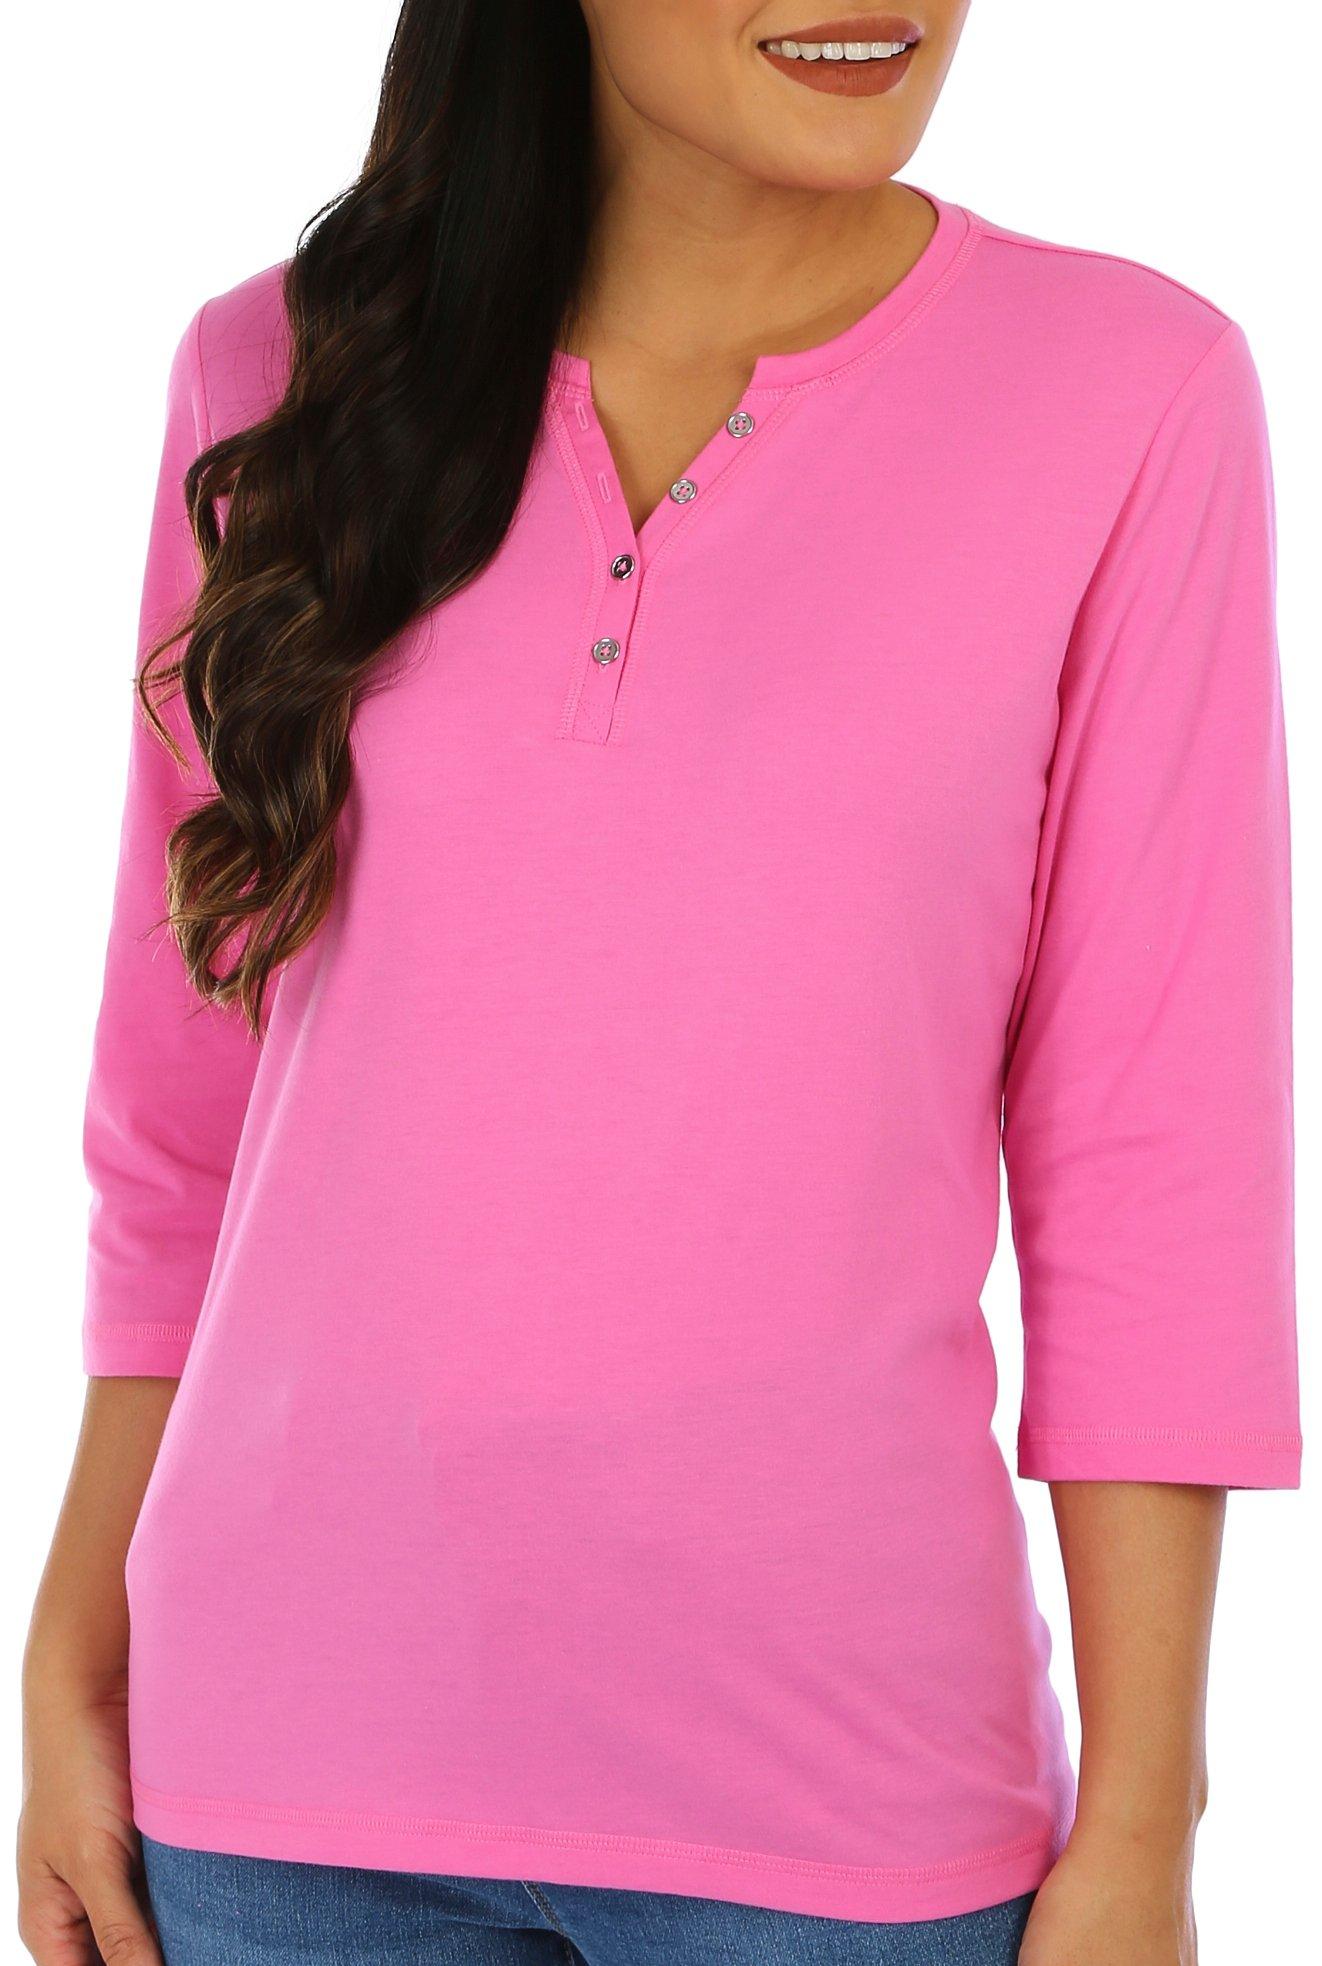 Petite 3/4 Sleeve Solid Color Henley Top